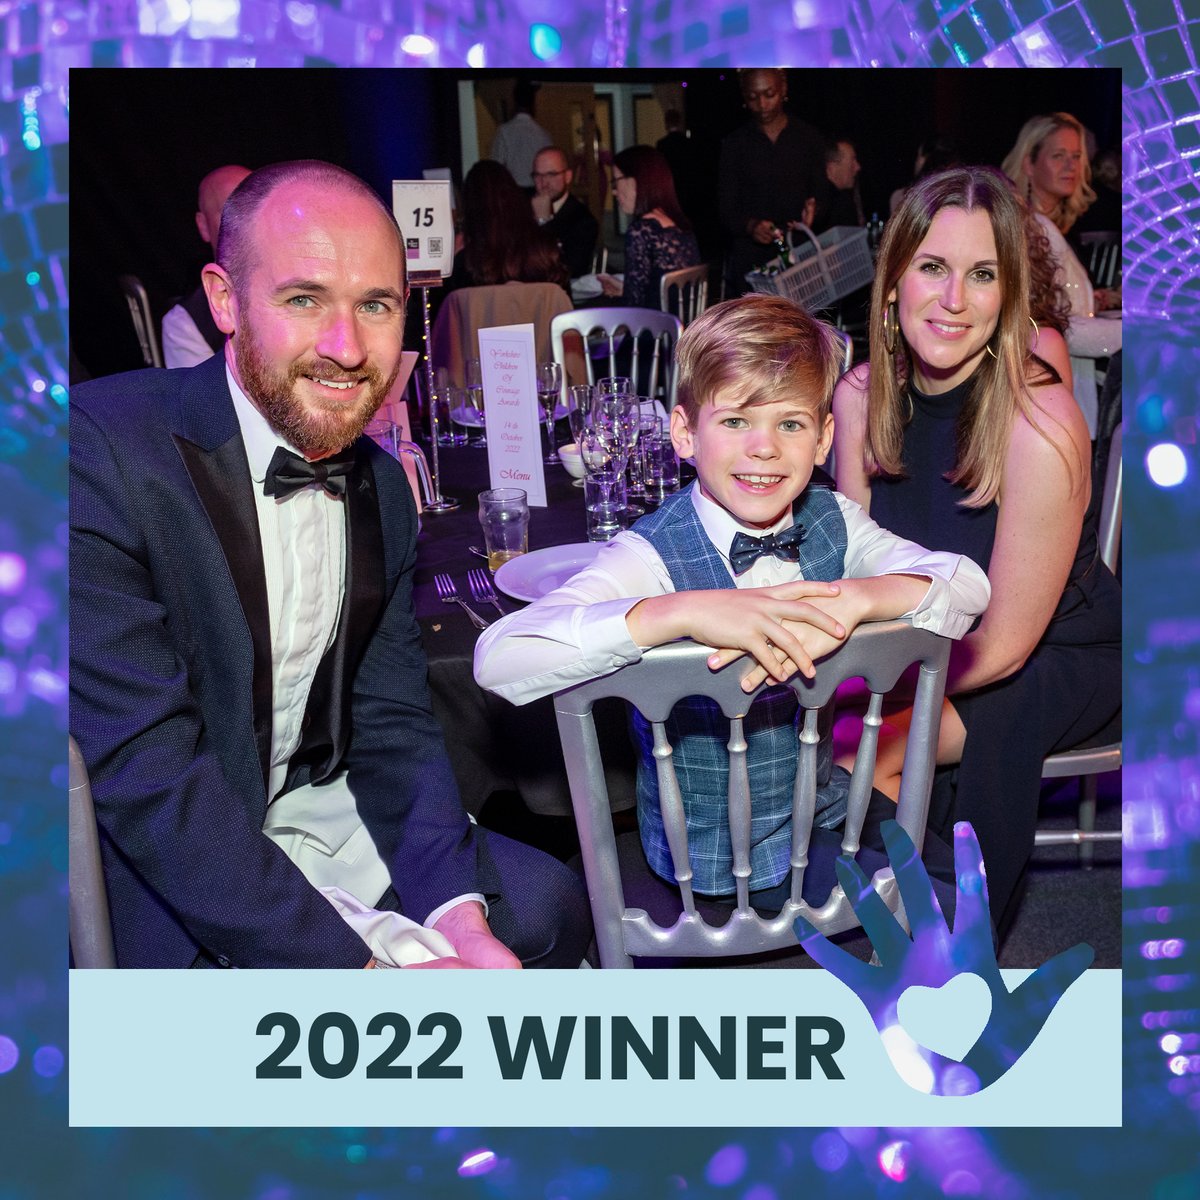 In preparation for the magic of this years event - lets take a look back at the wonderful winners of 2022 that made last year so amazing! Kicking off with our YCCA 2022 Community Champion (0 - 12 Years) winner Austin Law. You can see Austin's story over on our website!